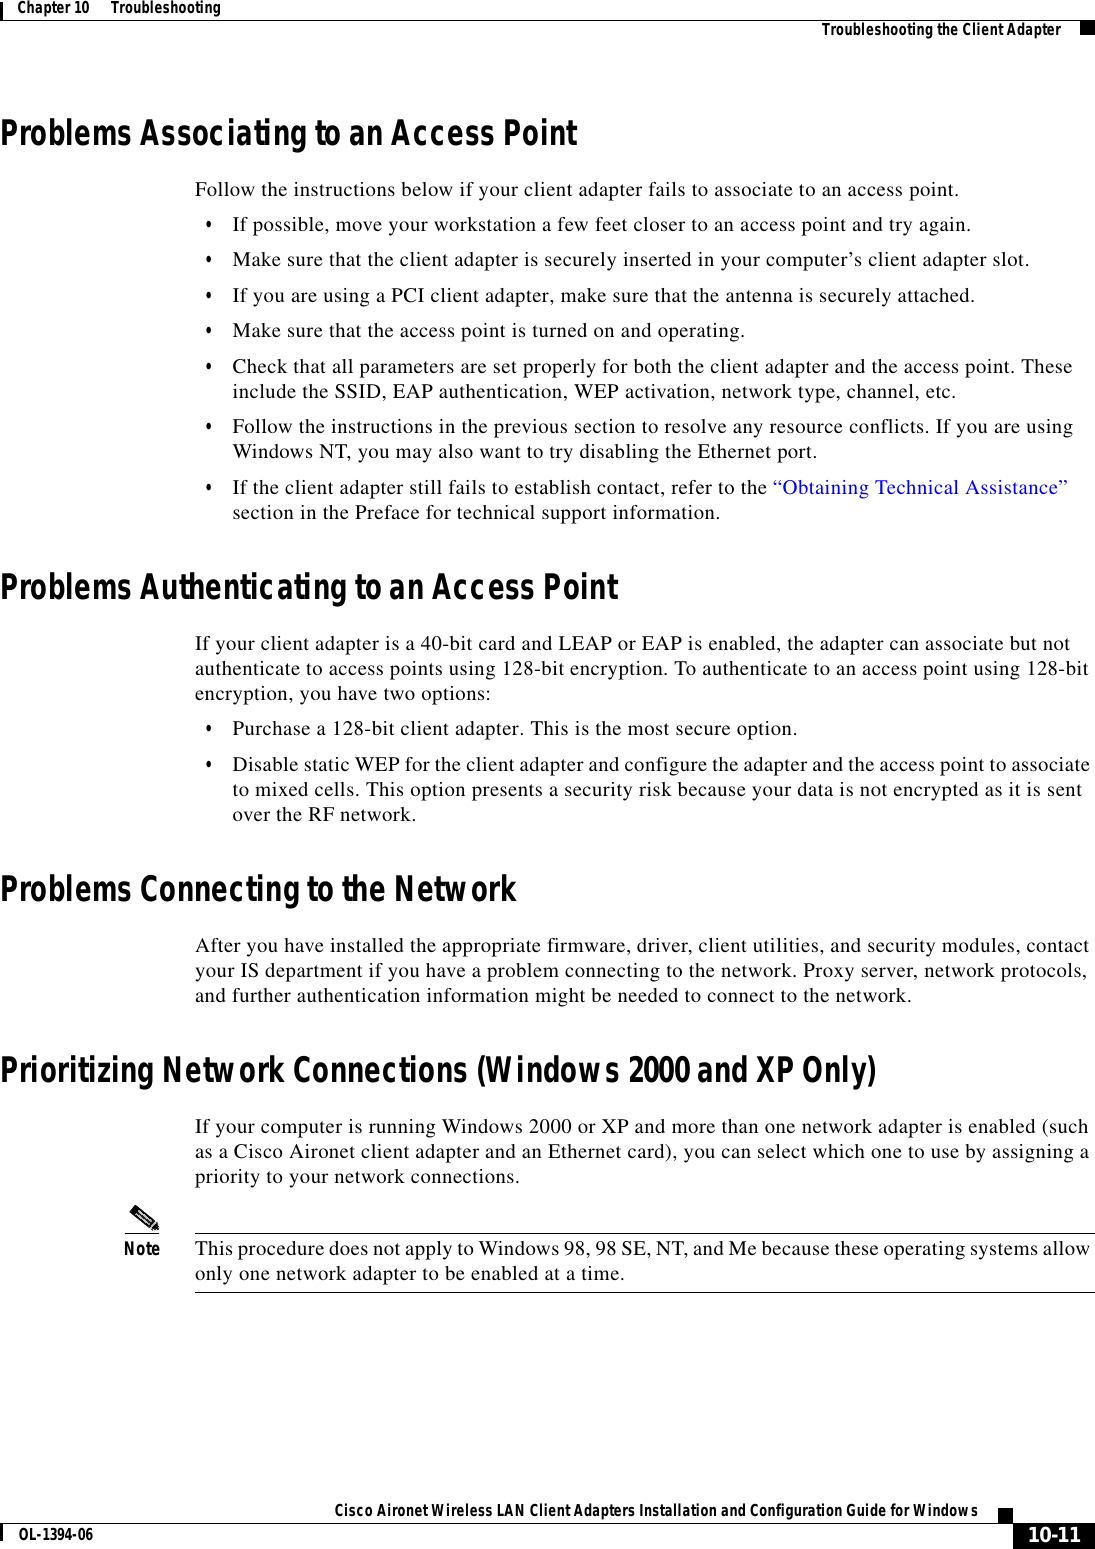 10-11Cisco Aironet Wireless LAN Client Adapters Installation and Configuration Guide for WindowsOL-1394-06Chapter 10      Troubleshooting Troubleshooting the Client AdapterProblems Associating to an Access PointFollow the instructions below if your client adapter fails to associate to an access point.•If possible, move your workstation a few feet closer to an access point and try again.•Make sure that the client adapter is securely inserted in your computer’s client adapter slot.•If you are using a PCI client adapter, make sure that the antenna is securely attached.•Make sure that the access point is turned on and operating.•Check that all parameters are set properly for both the client adapter and the access point. These include the SSID, EAP authentication, WEP activation, network type, channel, etc.•Follow the instructions in the previous section to resolve any resource conflicts. If you are using Windows NT, you may also want to try disabling the Ethernet port.•If the client adapter still fails to establish contact, refer to the “Obtaining Technical Assistance”section in the Preface for technical support information.Problems Authenticating to an Access PointIf your client adapter is a 40-bit card and LEAP or EAP is enabled, the adapter can associate but not authenticate to access points using 128-bit encryption. To authenticate to an access point using 128-bit encryption, you have two options:•Purchase a 128-bit client adapter. This is the most secure option.•Disable static WEP for the client adapter and configure the adapter and the access point to associate to mixed cells. This option presents a security risk because your data is not encrypted as it is sent over the RF network.Problems Connecting to the NetworkAfter you have installed the appropriate firmware, driver, client utilities, and security modules, contact your IS department if you have a problem connecting to the network. Proxy server, network protocols, and further authentication information might be needed to connect to the network.Prioritizing Network Connections (Windows 2000 and XP Only)If your computer is running Windows 2000 or XP and more than one network adapter is enabled (such as a Cisco Aironet client adapter and an Ethernet card), you can select which one to use by assigning a priority to your network connections.Note This procedure does not apply to Windows 98, 98 SE, NT, and Me because these operating systems allow only one network adapter to be enabled at a time.